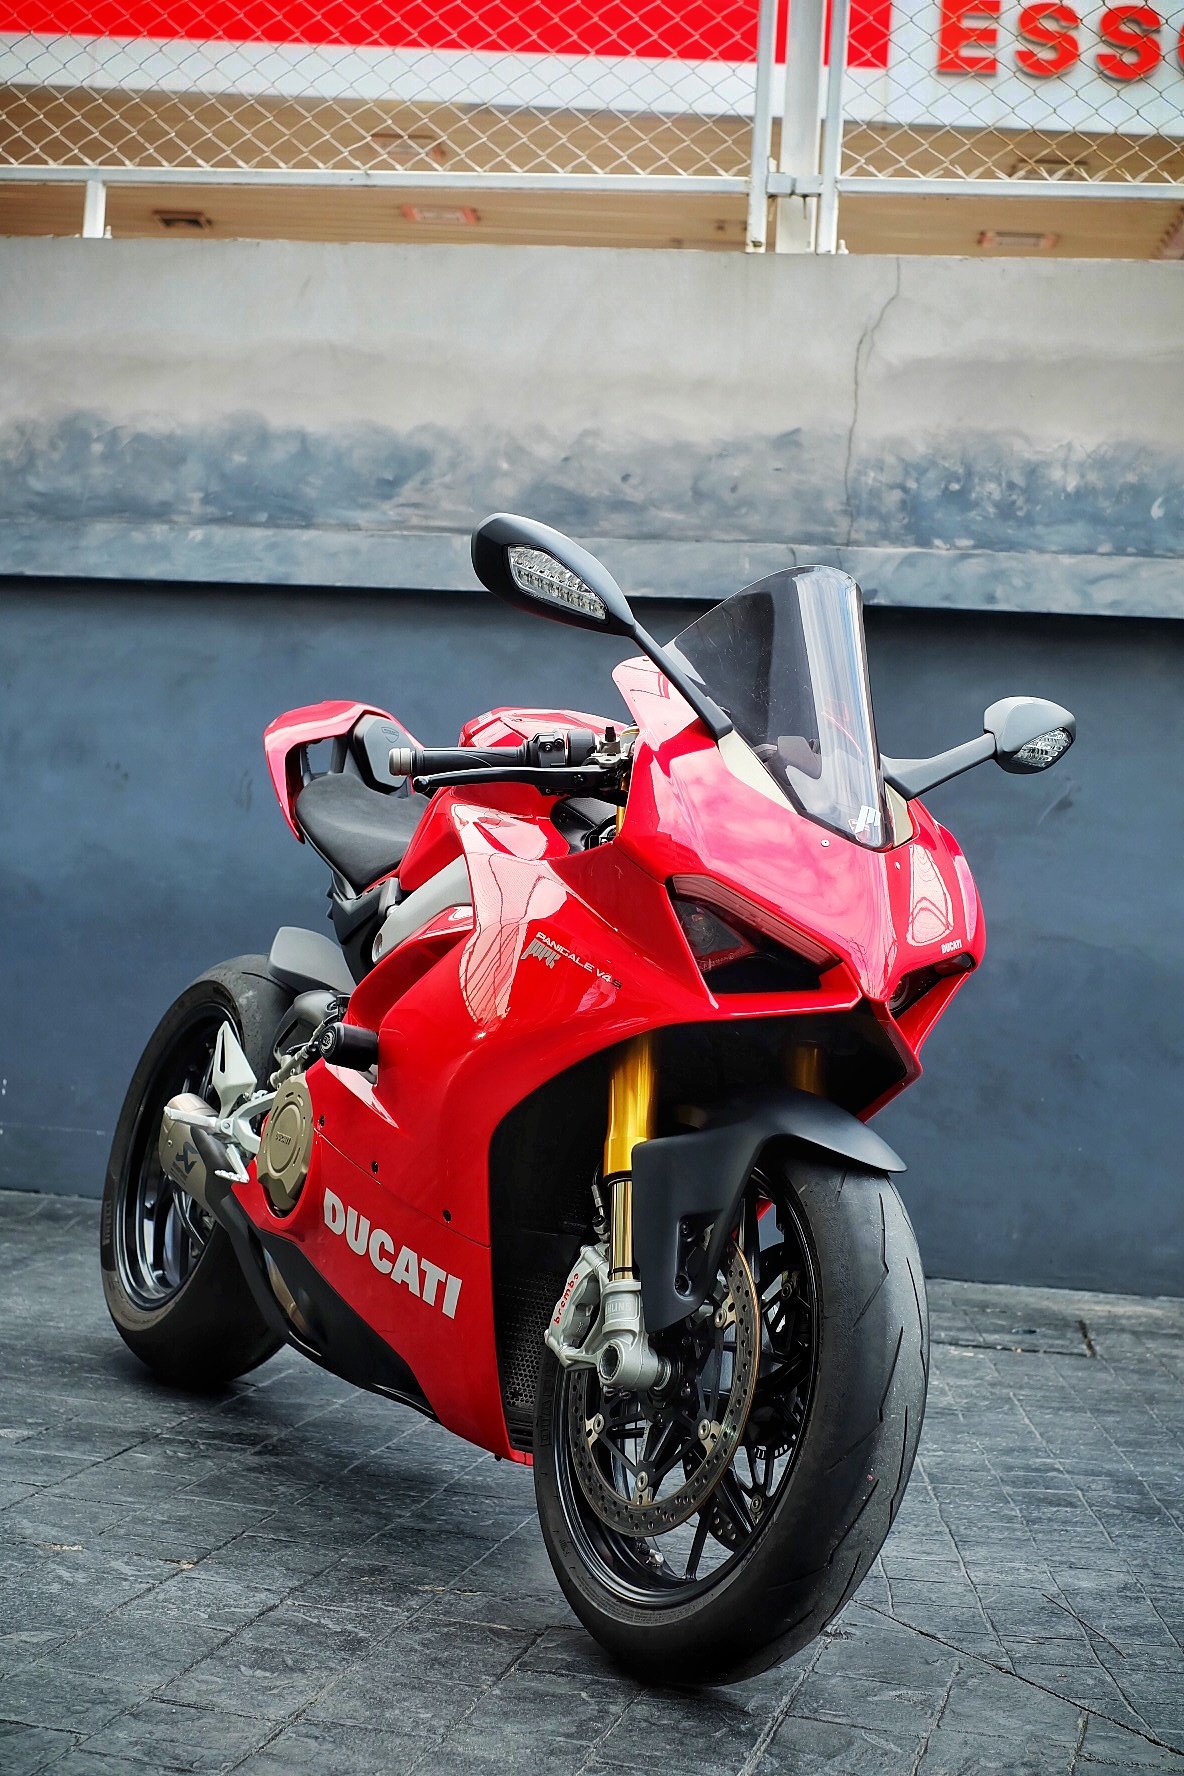 DUCATI PANIGALE V4S 2019 WITH AKRAPOVIC FULL SYSTEM